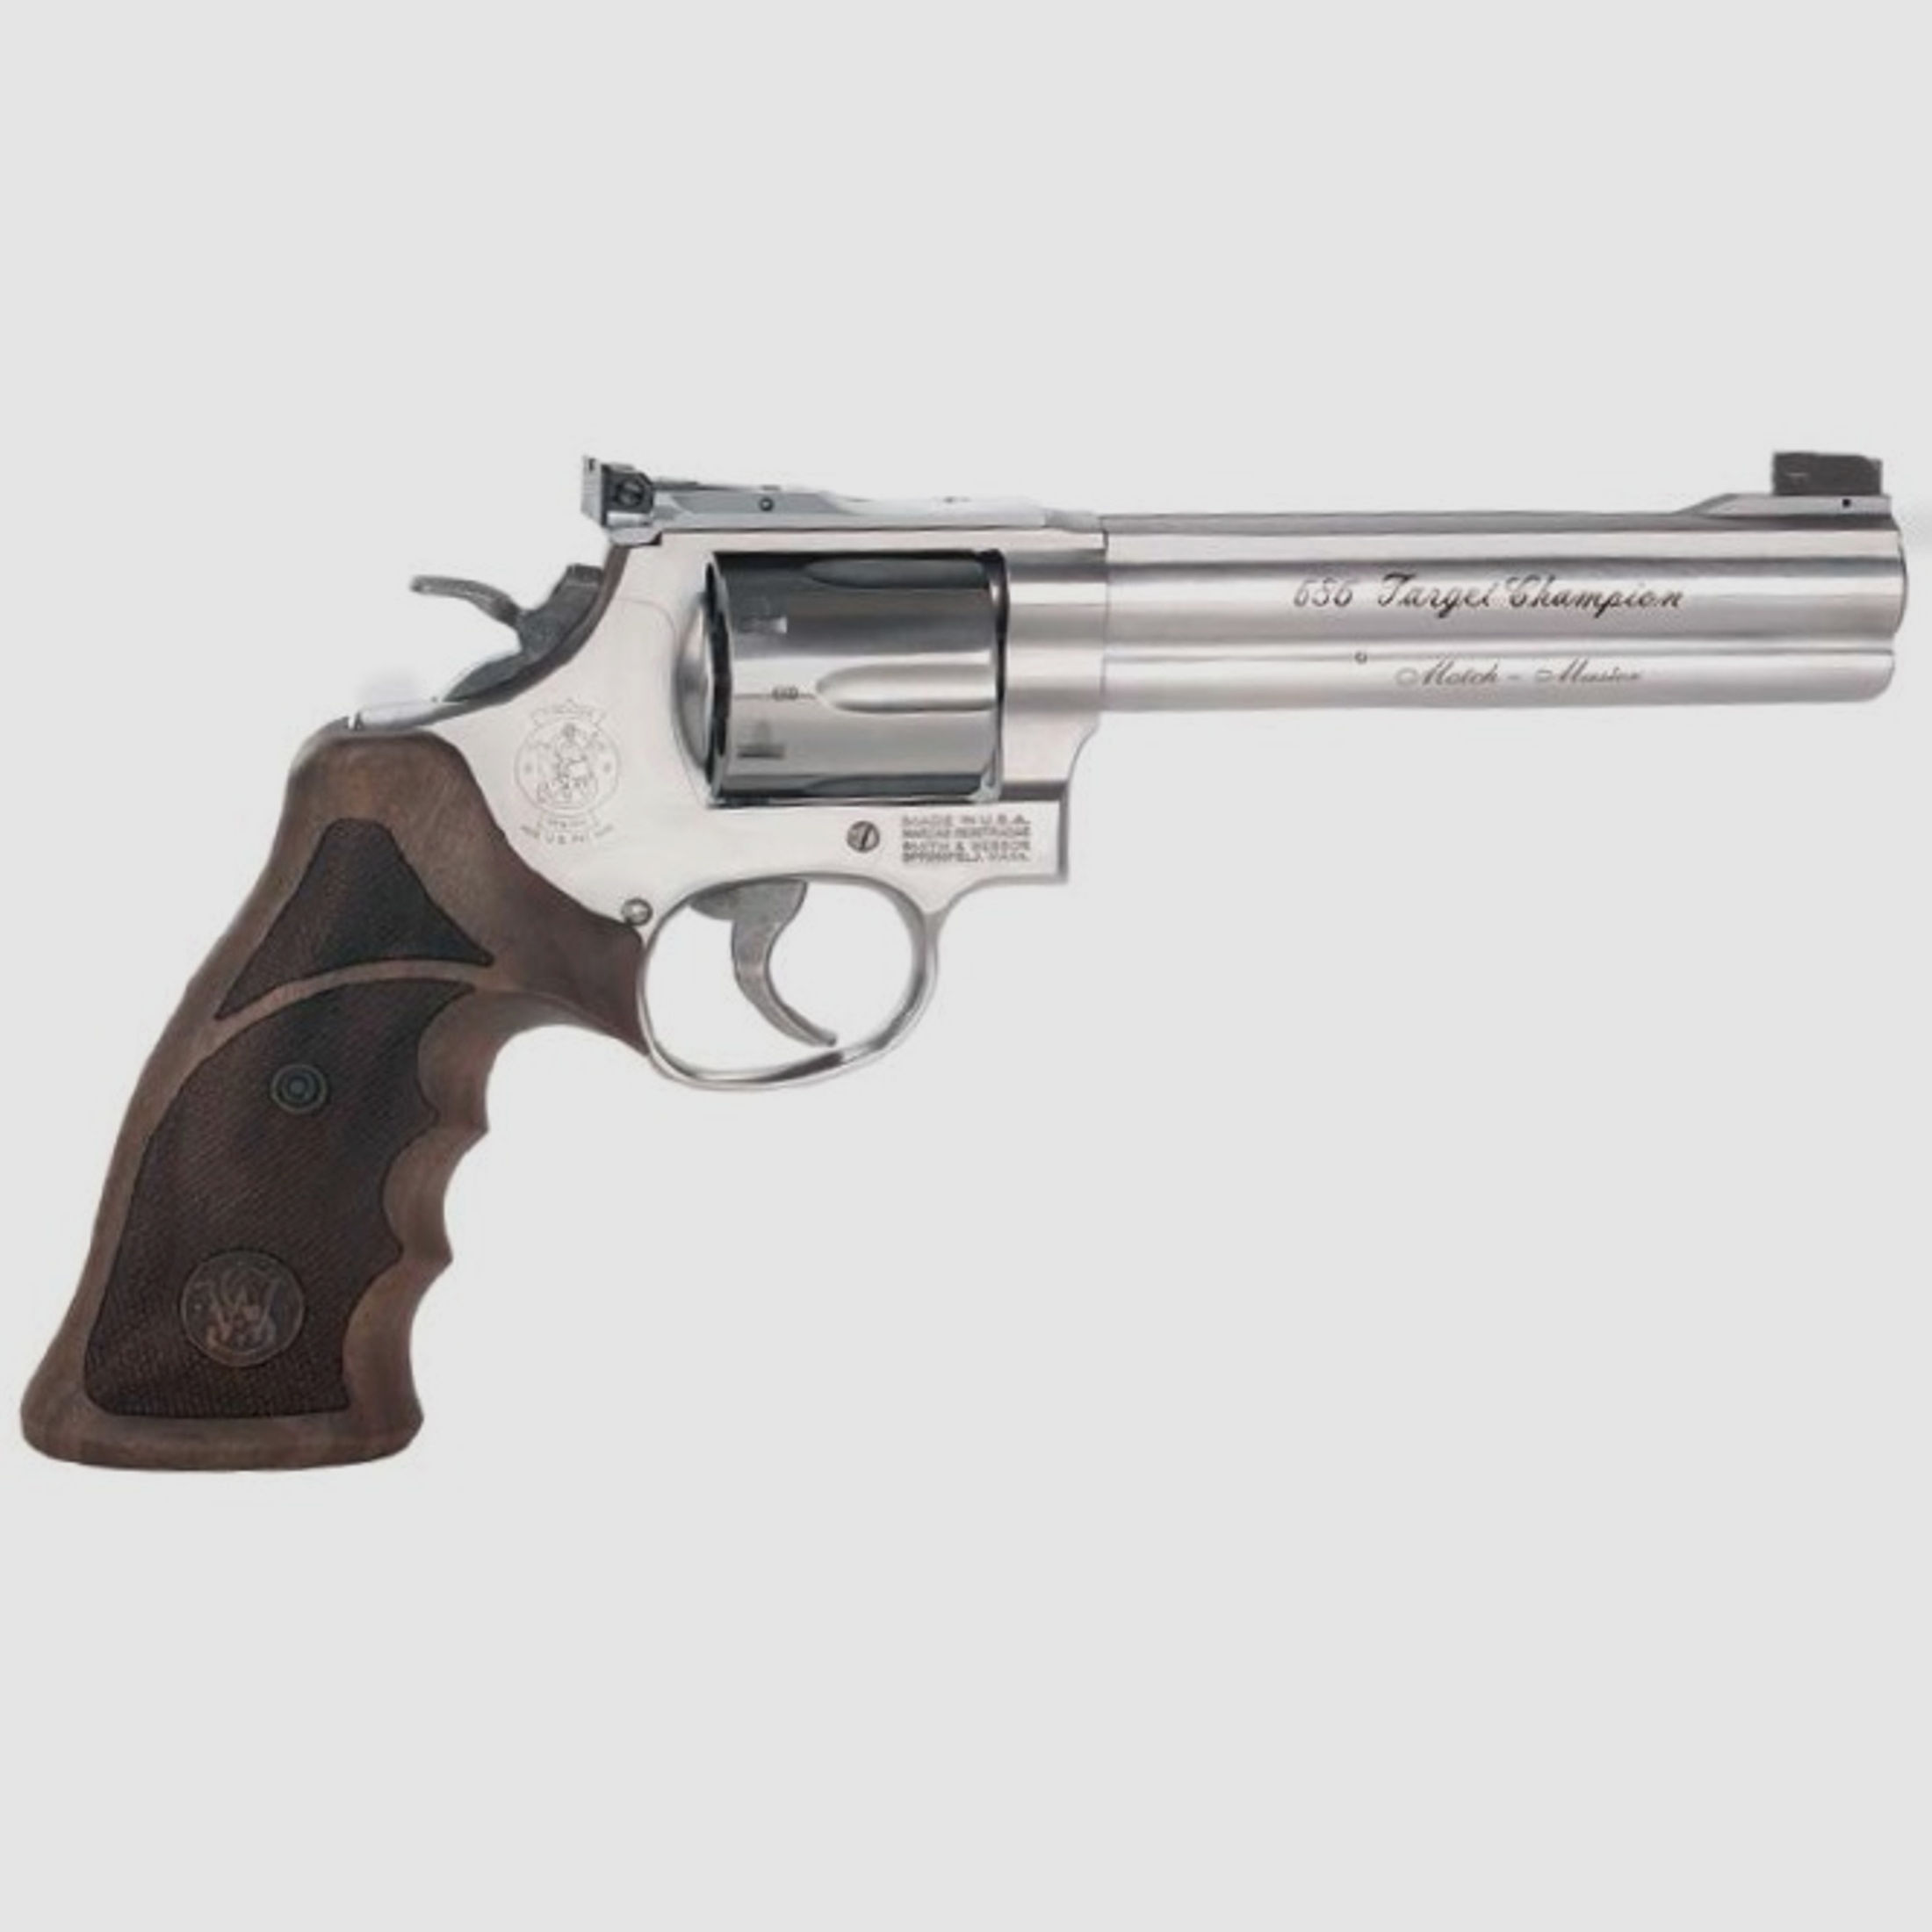 Smith & Wesson 686 Target Champion*